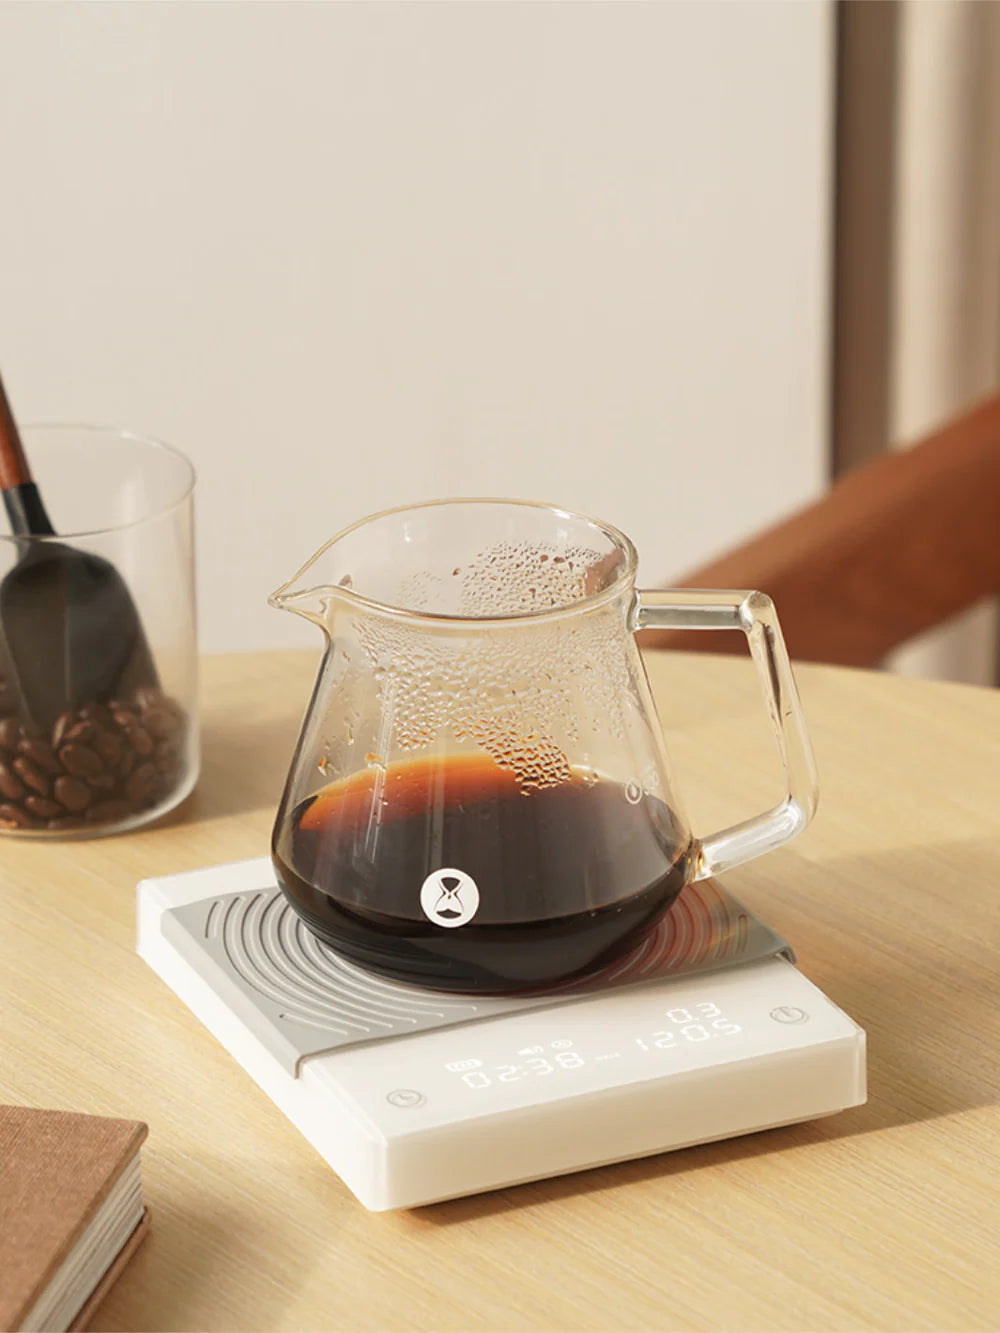 TIMEMORE Black Mirror BASIC+ Coffee Scale